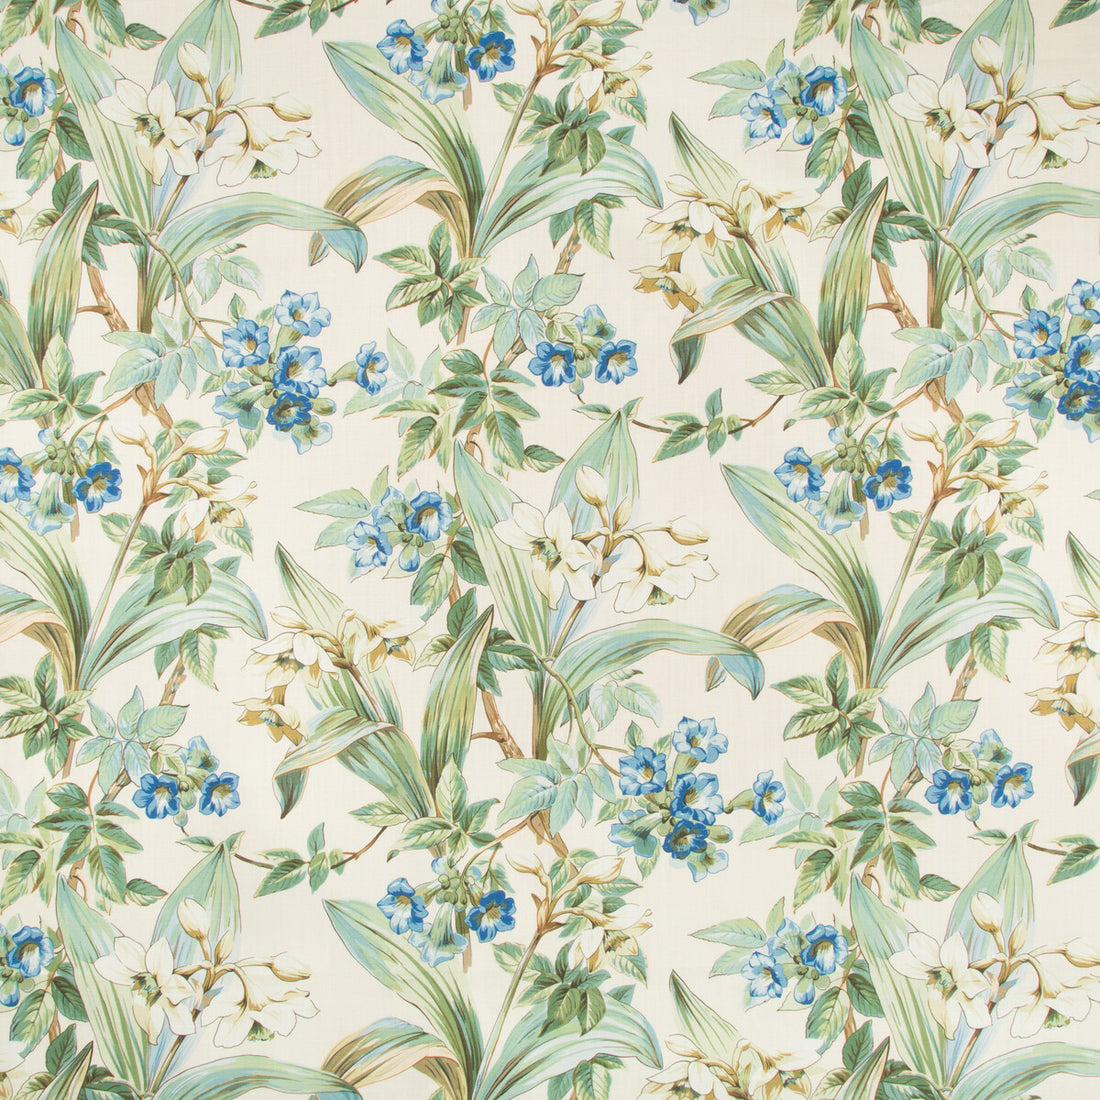 Daffodil And VIne fabric in blue color - pattern 8018117.5.0 - by Brunschwig &amp; Fils in the Cevennes collection